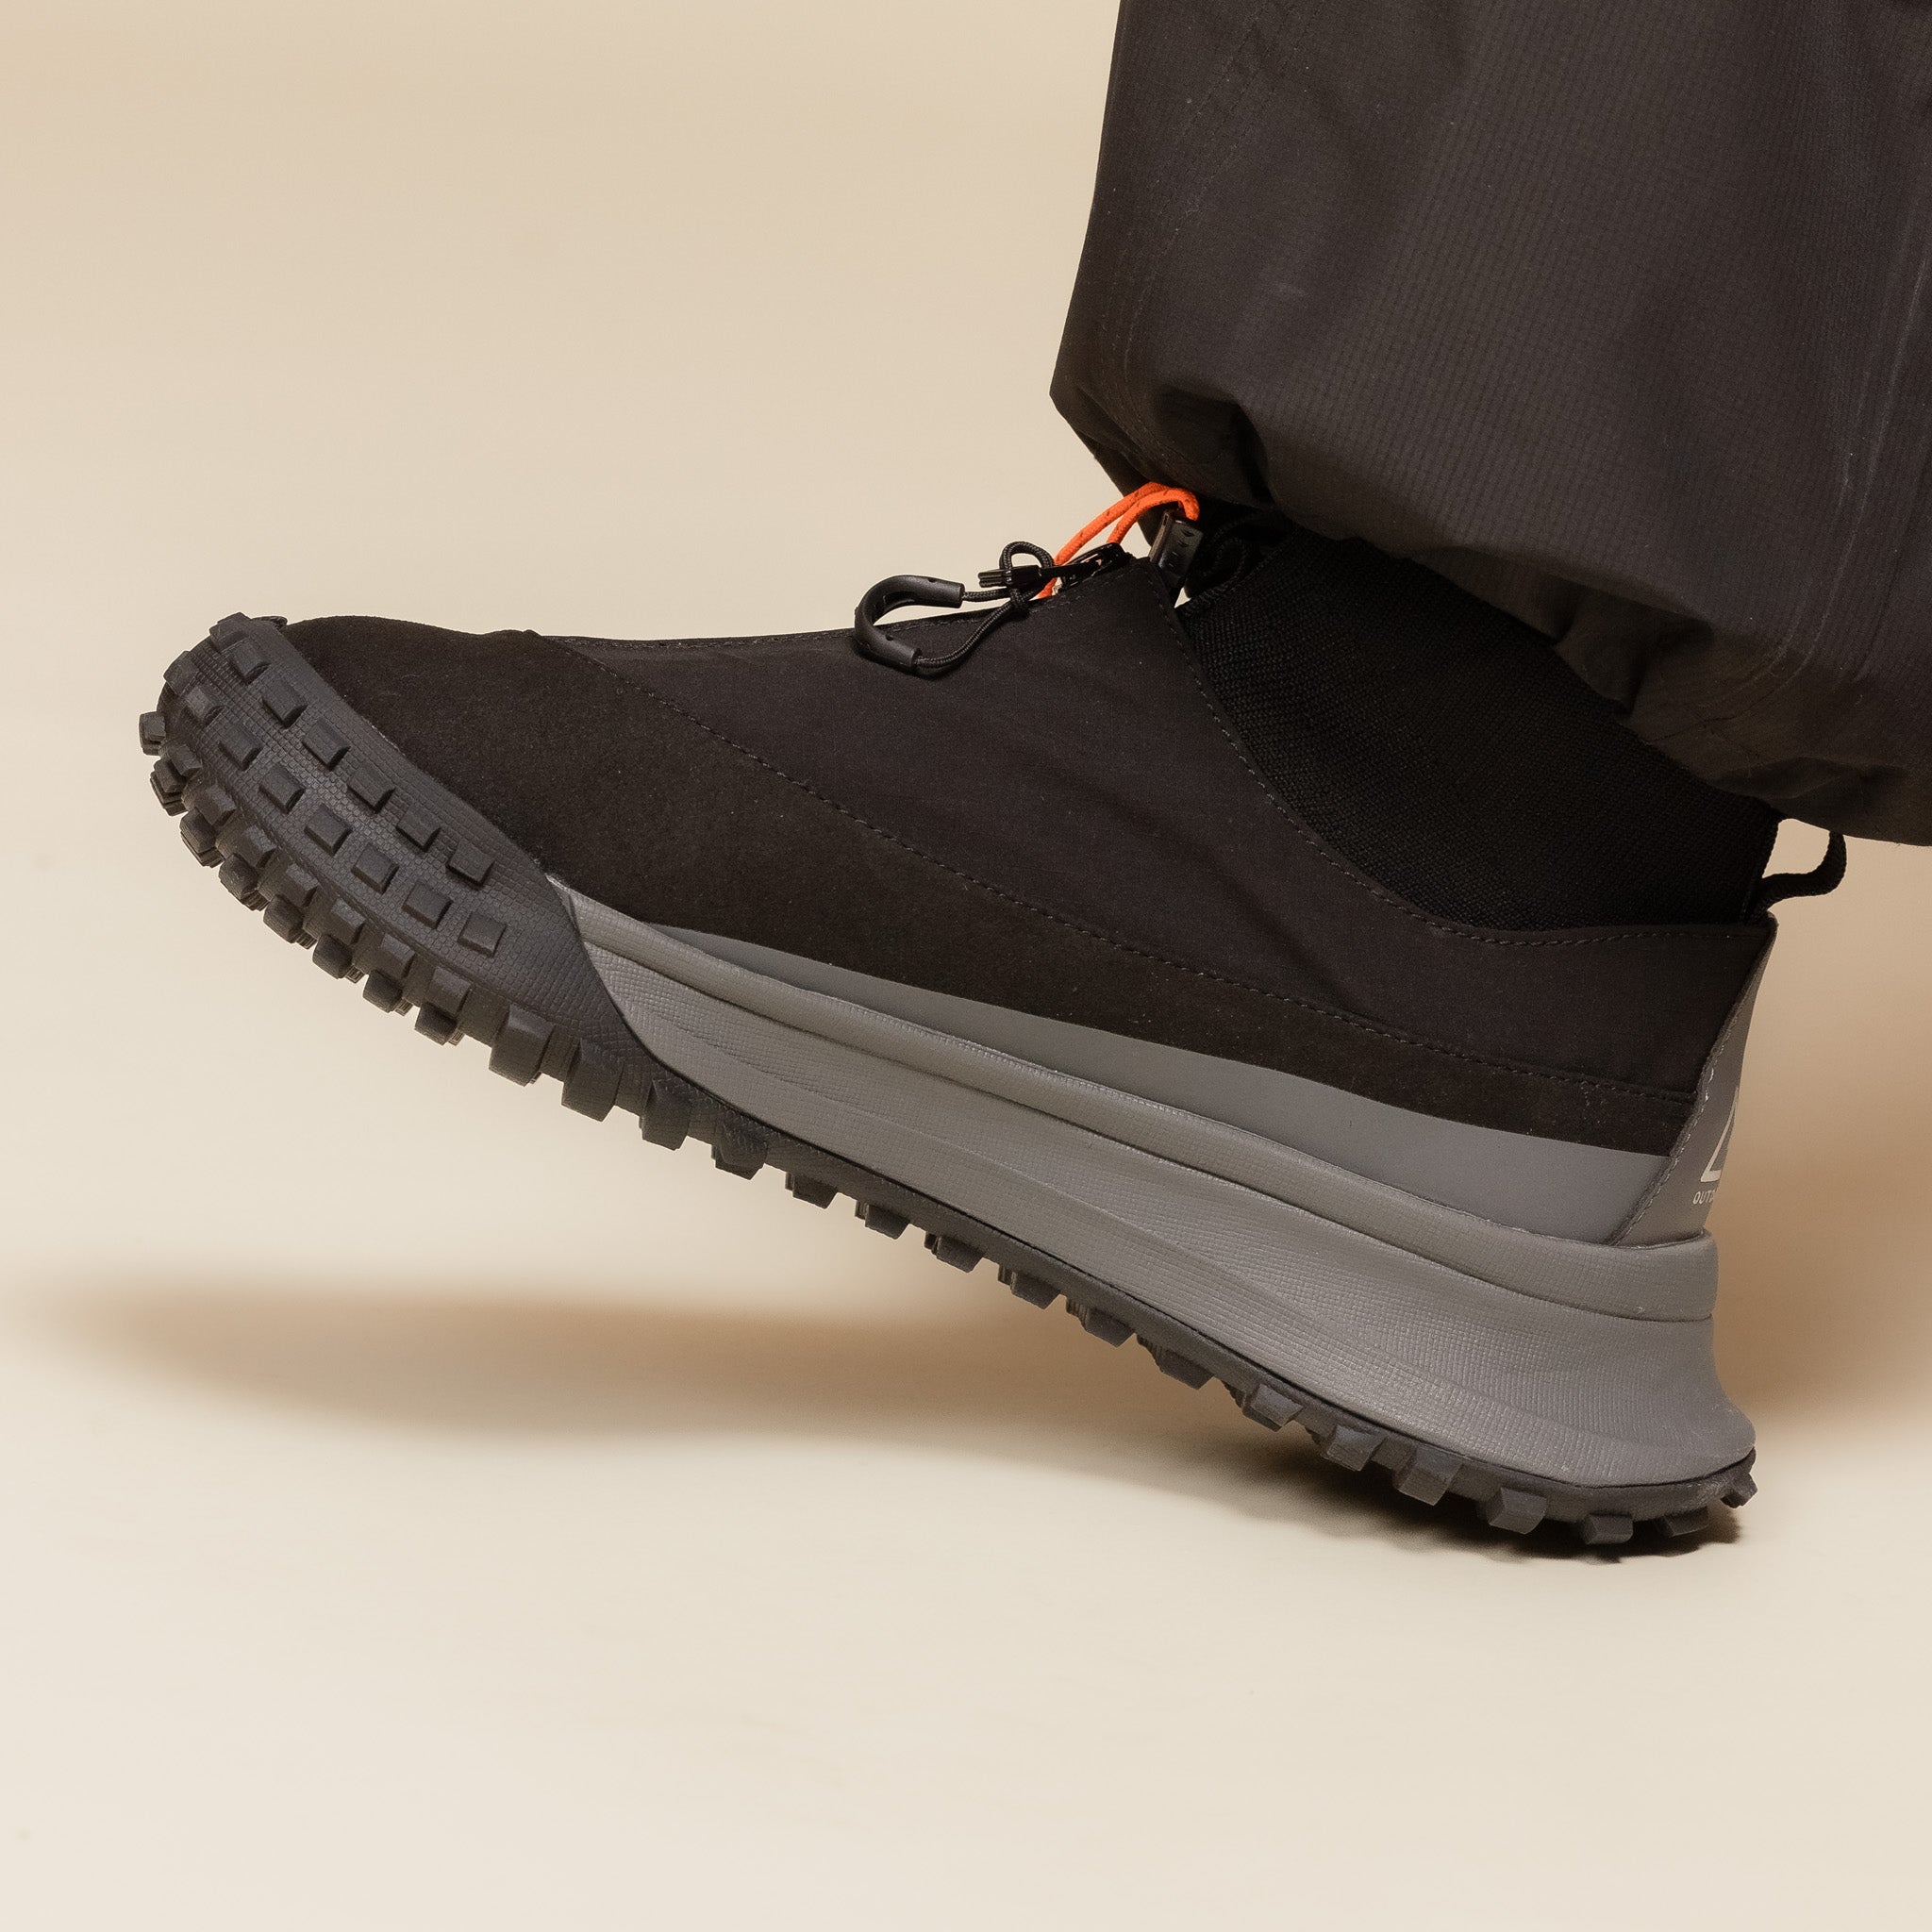 CMF Comfy Outdoor Garment - Approach Shoes 03 Knit - Black "cmf outdoor garment stockist" "cmf outdoor garment shoes" "comfy outdoor garment shoes" 